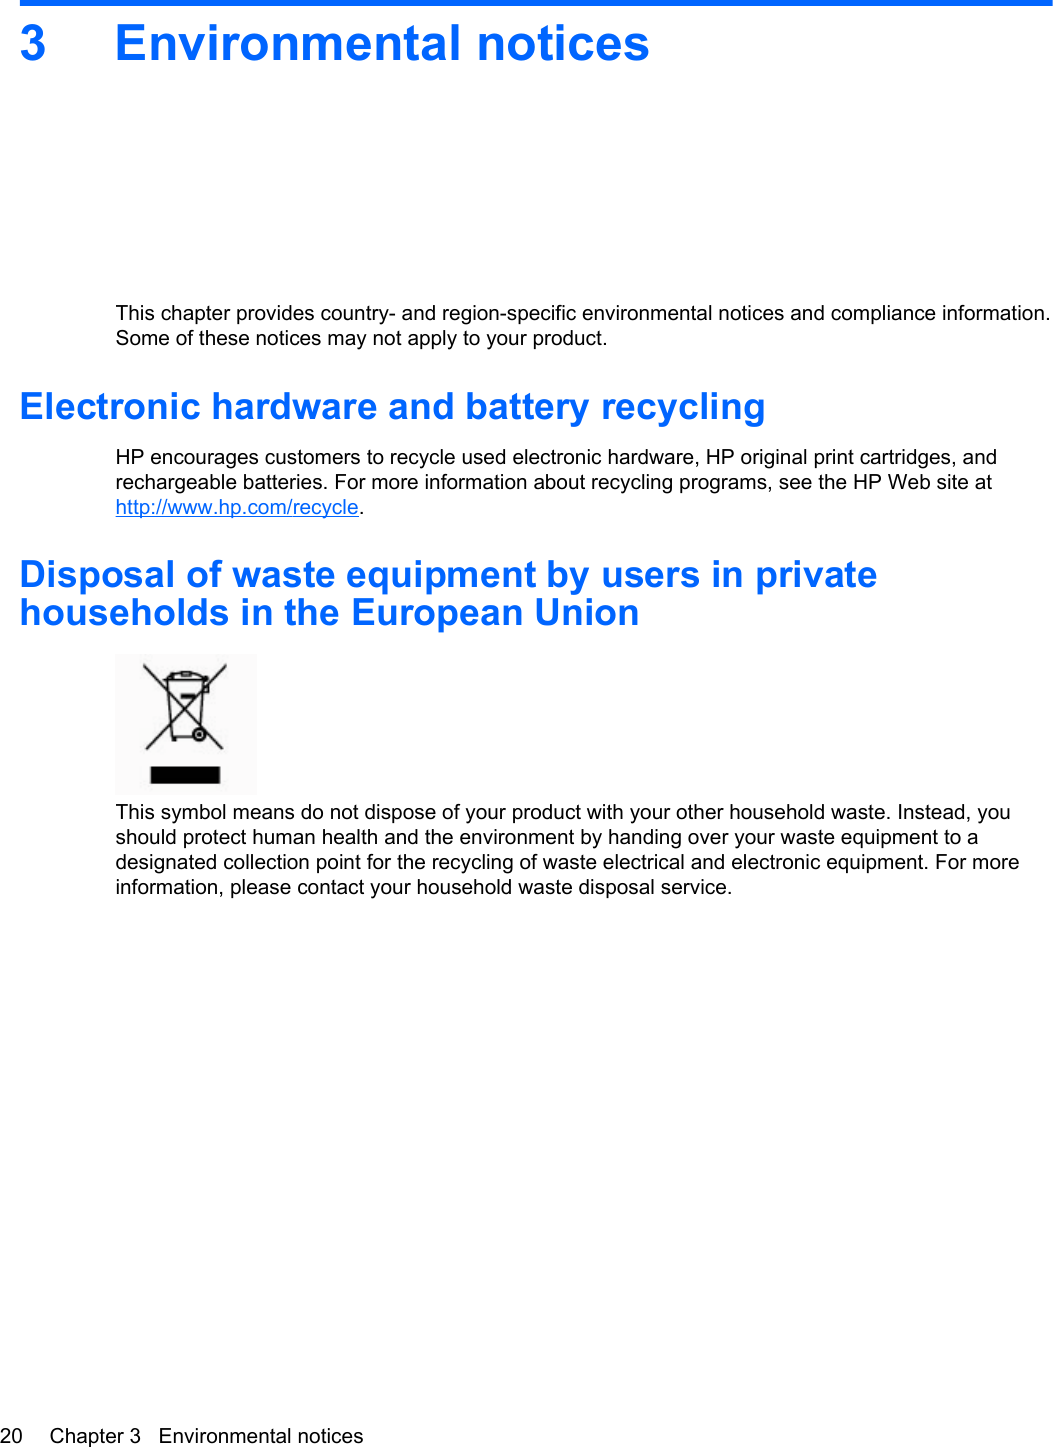 3 Environmental noticesThis chapter provides country- and region-specific environmental notices and compliance information.Some of these notices may not apply to your product.Electronic hardware and battery recyclingHP encourages customers to recycle used electronic hardware, HP original print cartridges, andrechargeable batteries. For more information about recycling programs, see the HP Web site athttp://www.hp.com/recycle.Disposal of waste equipment by users in privatehouseholds in the European UnionThis symbol means do not dispose of your product with your other household waste. Instead, youshould protect human health and the environment by handing over your waste equipment to adesignated collection point for the recycling of waste electrical and electronic equipment. For moreinformation, please contact your household waste disposal service.20 Chapter 3   Environmental notices